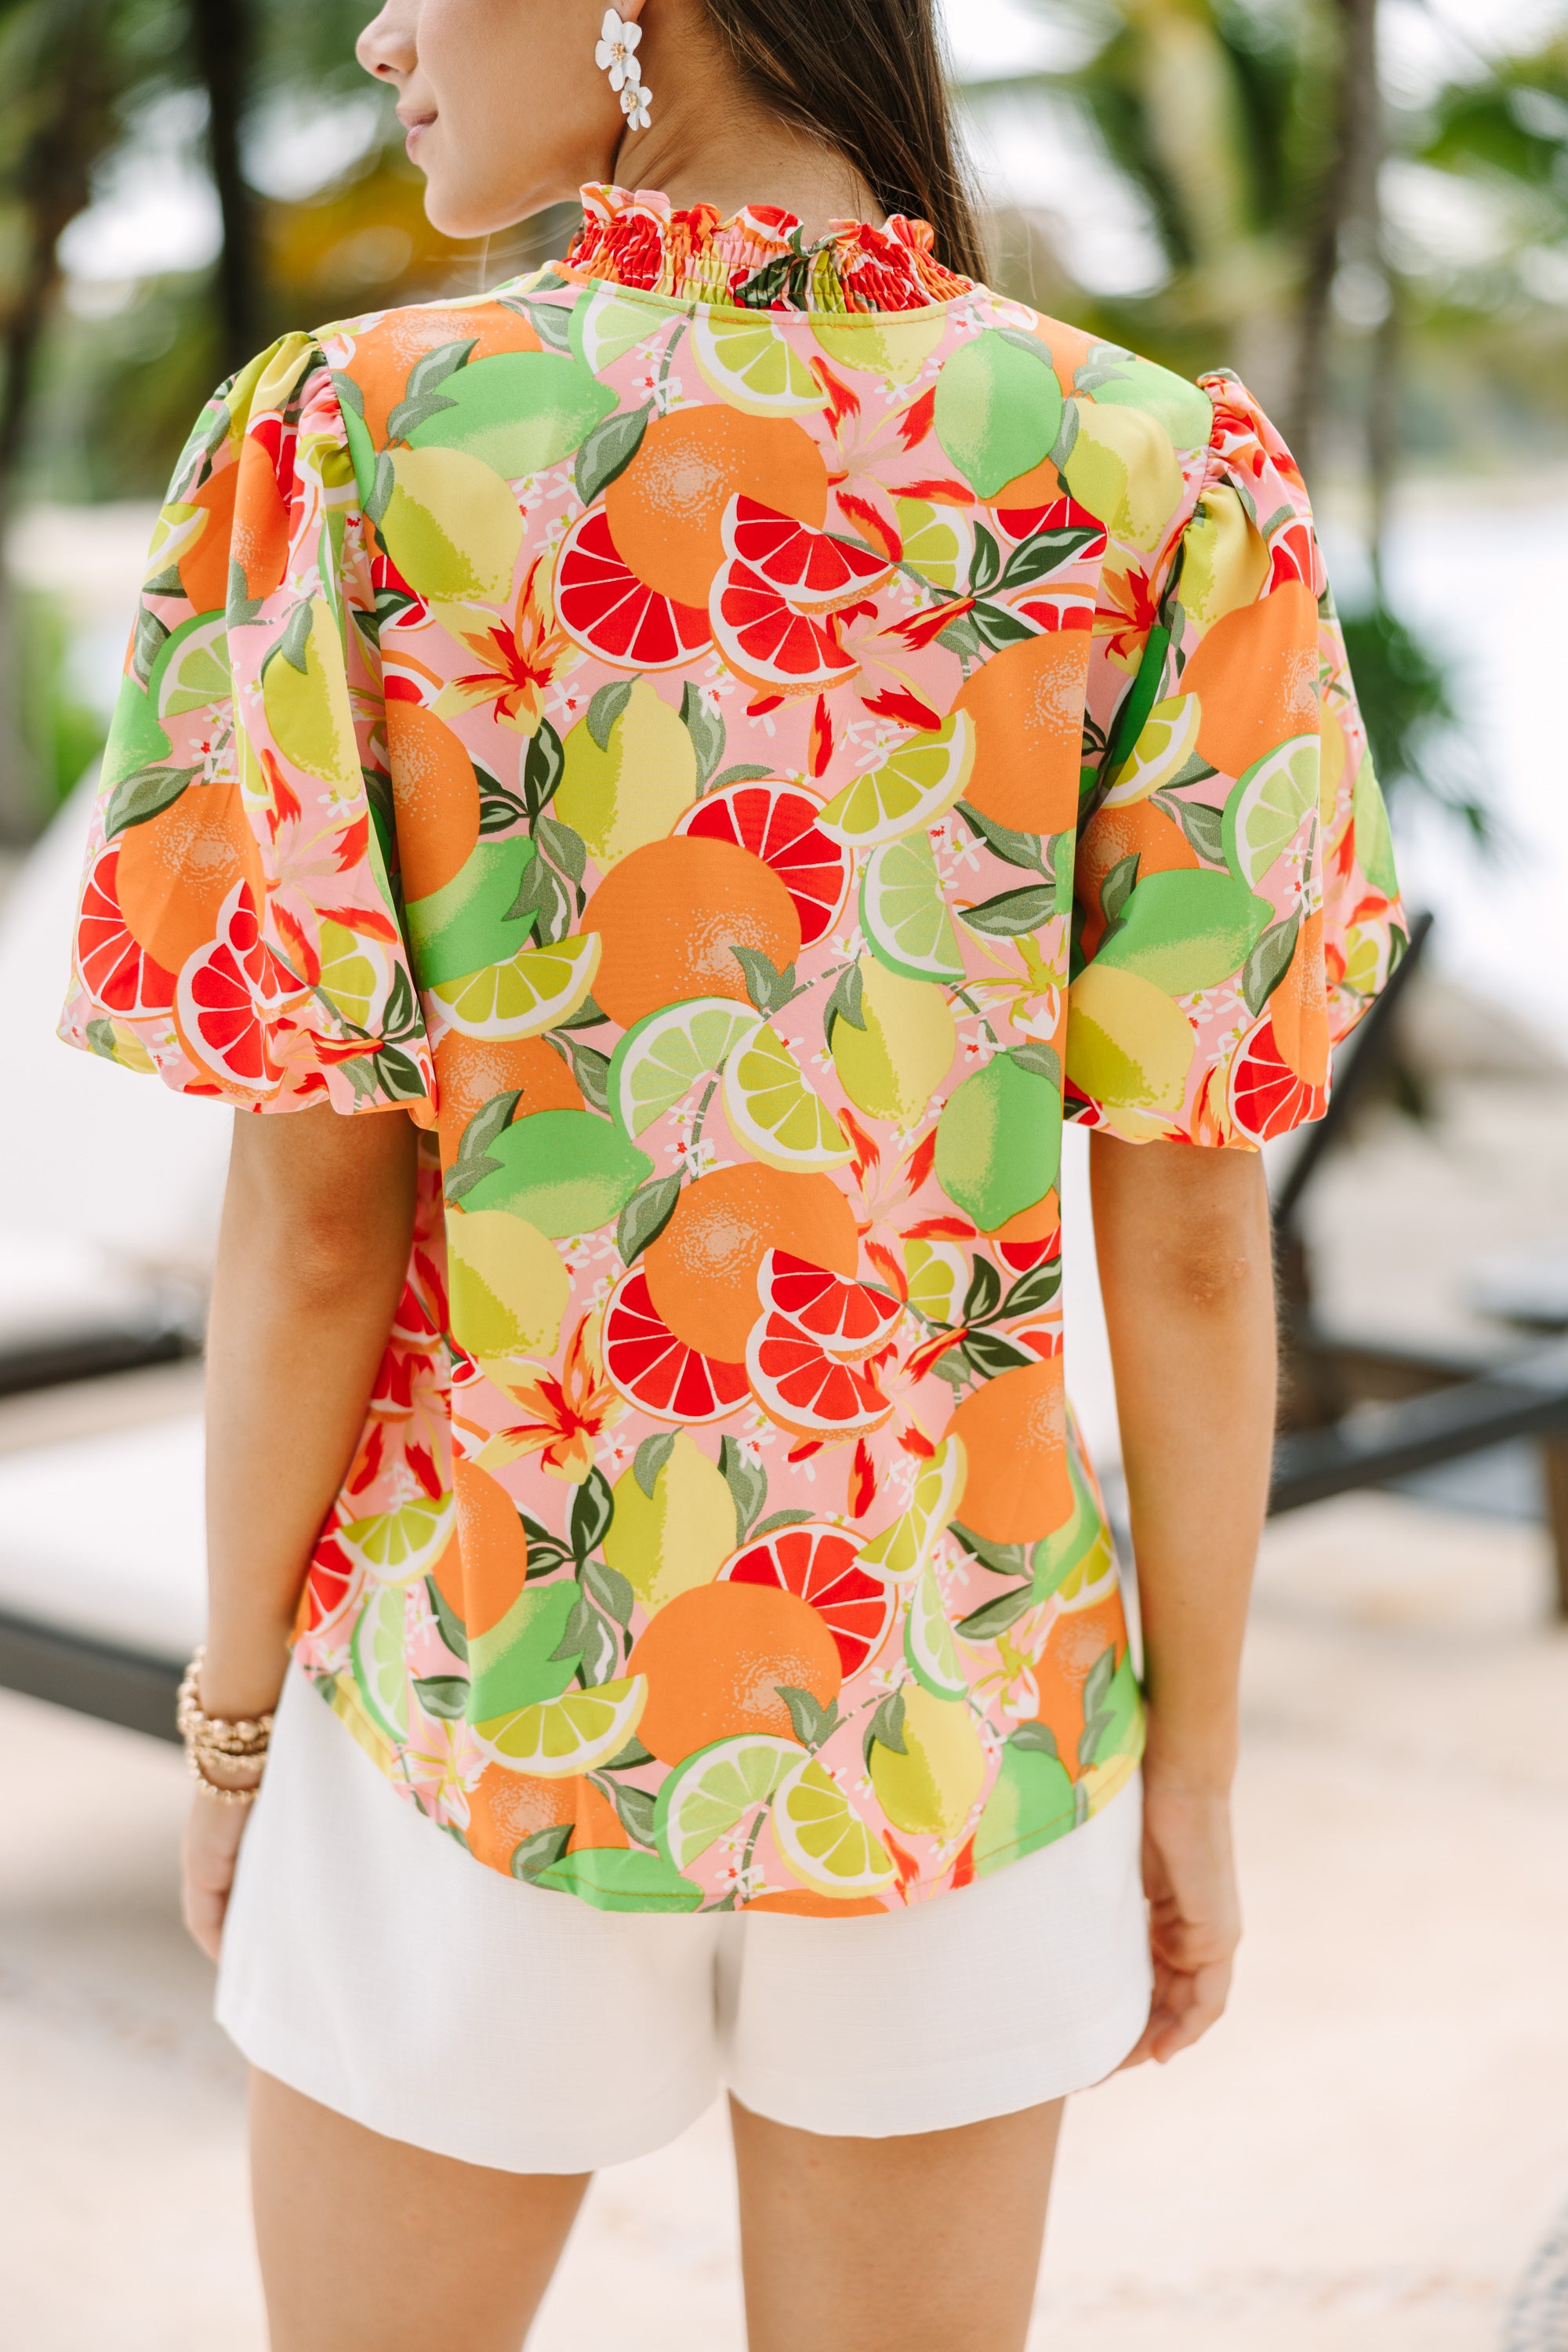 Find You Well Orange Citrus Printed Blouse